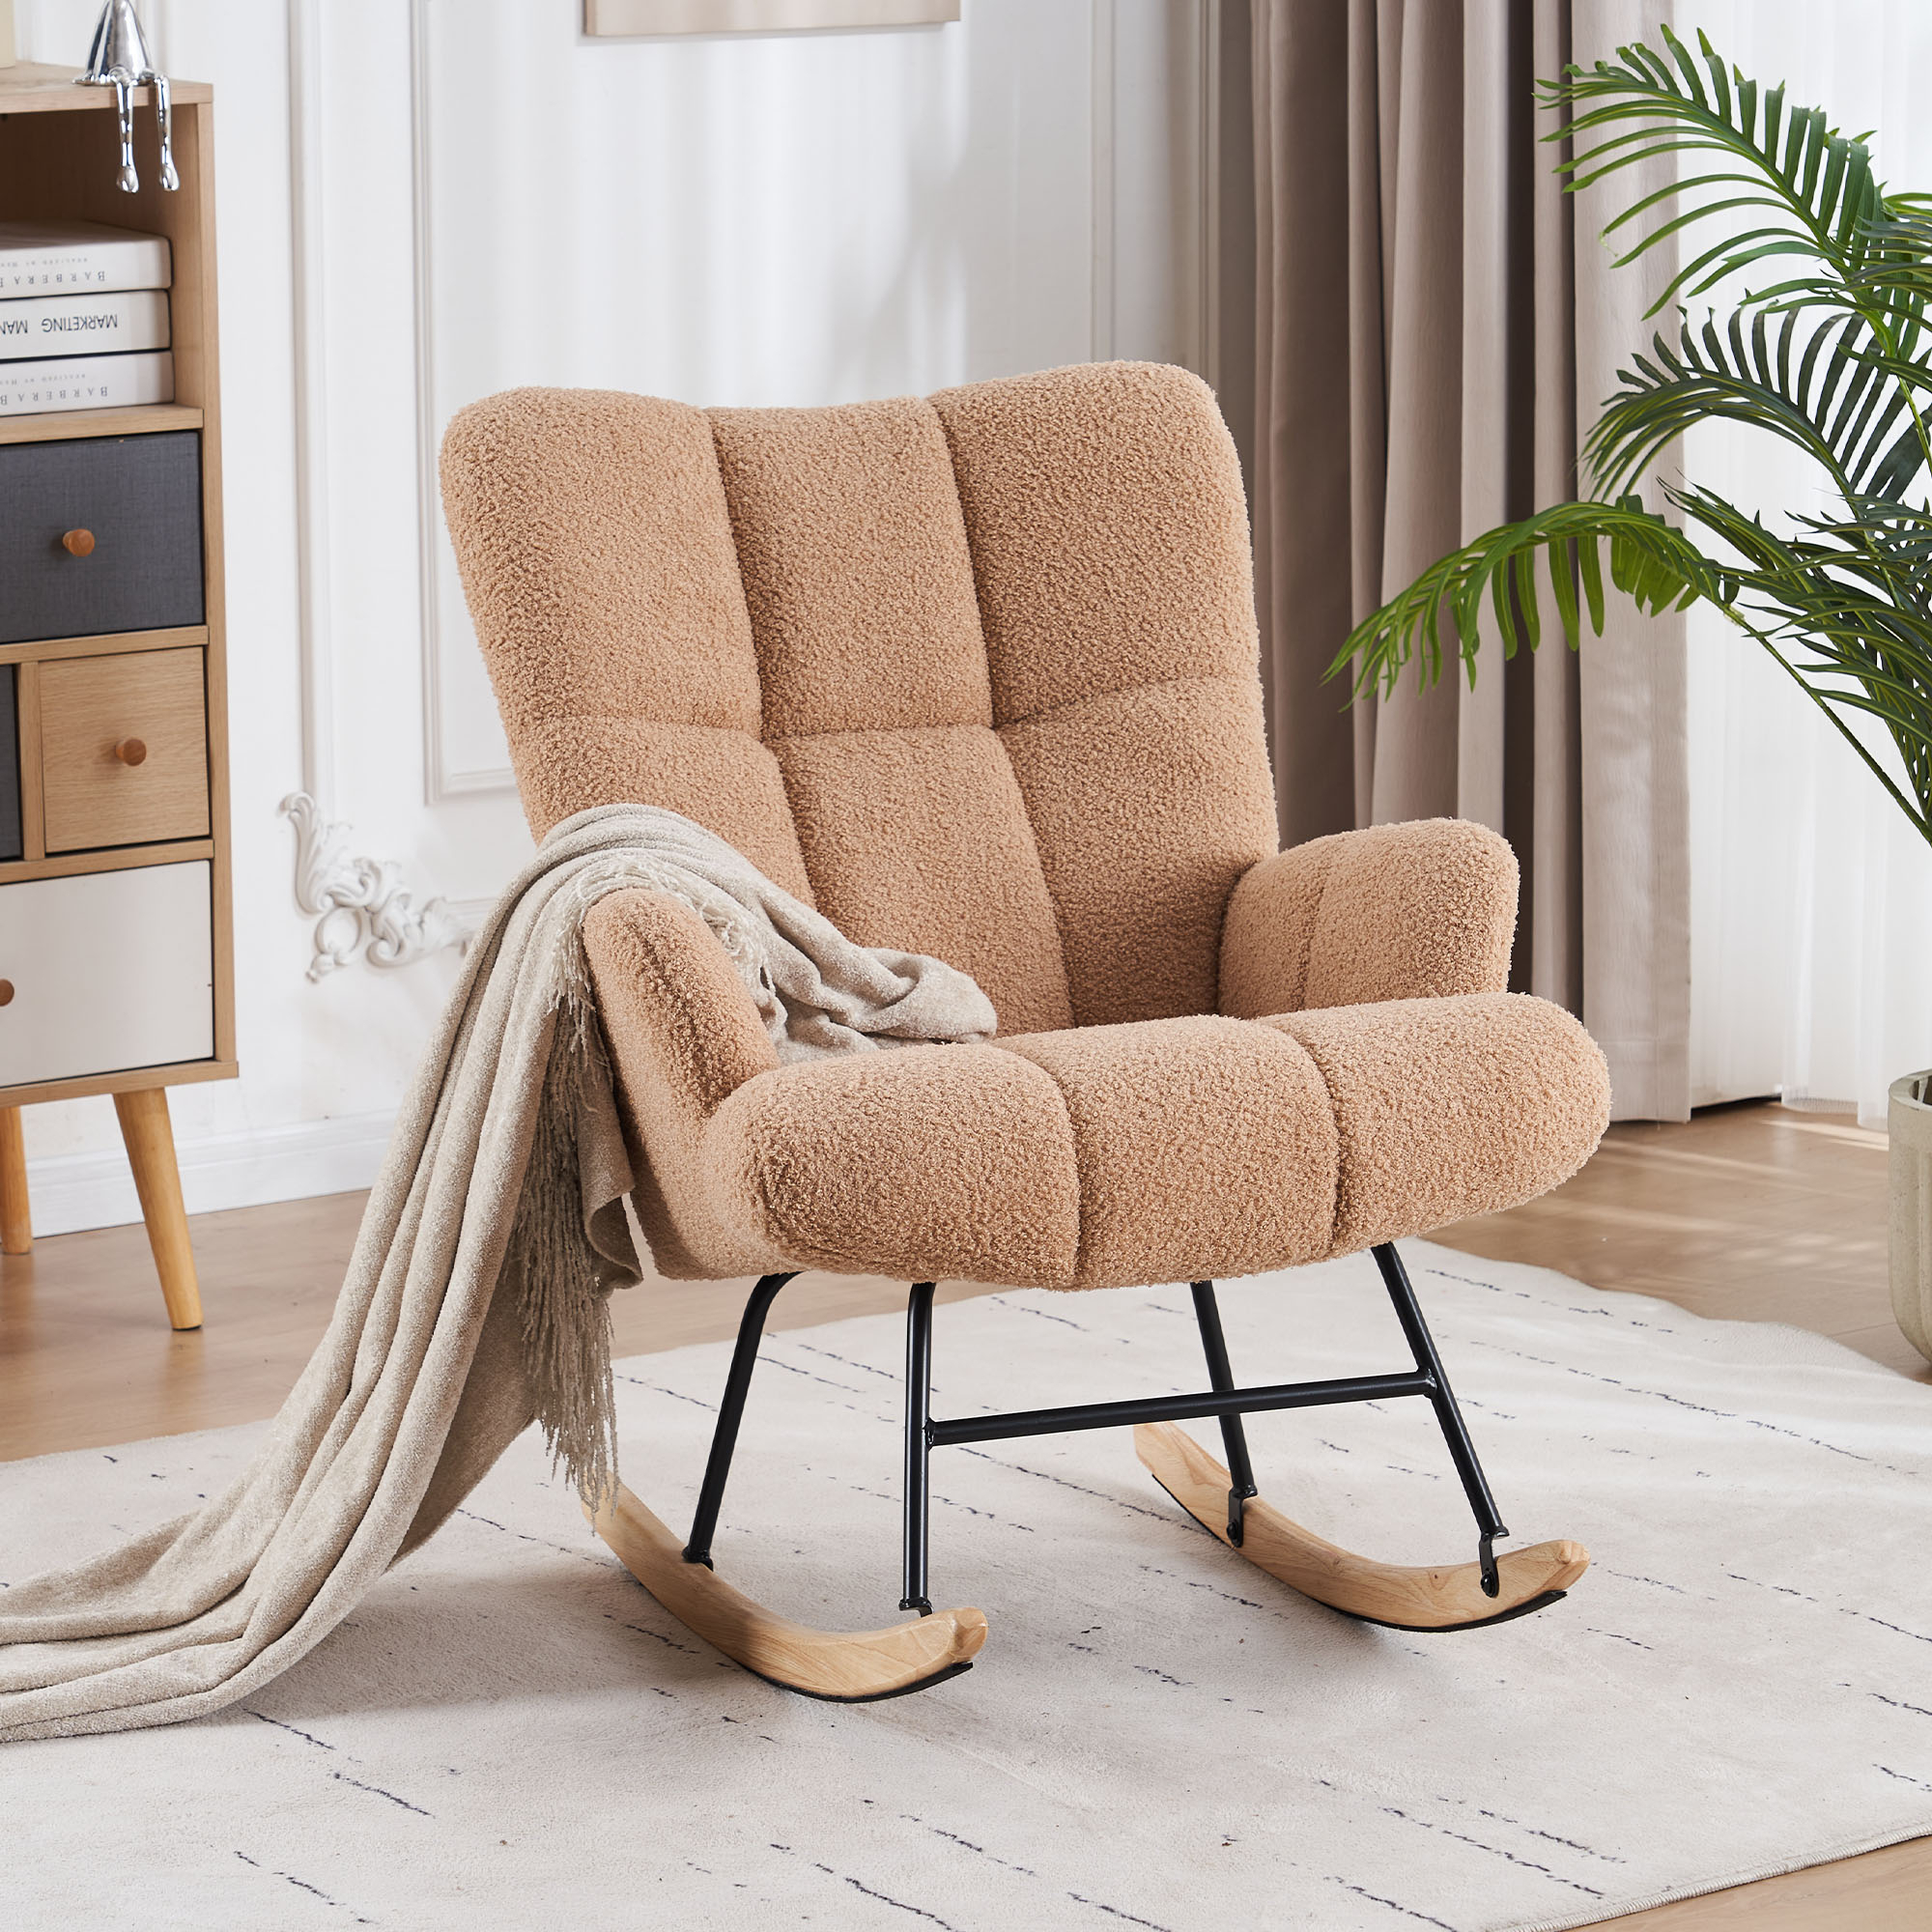 Teddy Velvet Rocking Accent Chair, Uplostered Glider Rocker Armchair For Nursery, Comfy Wingback Armchair - Pale Brown